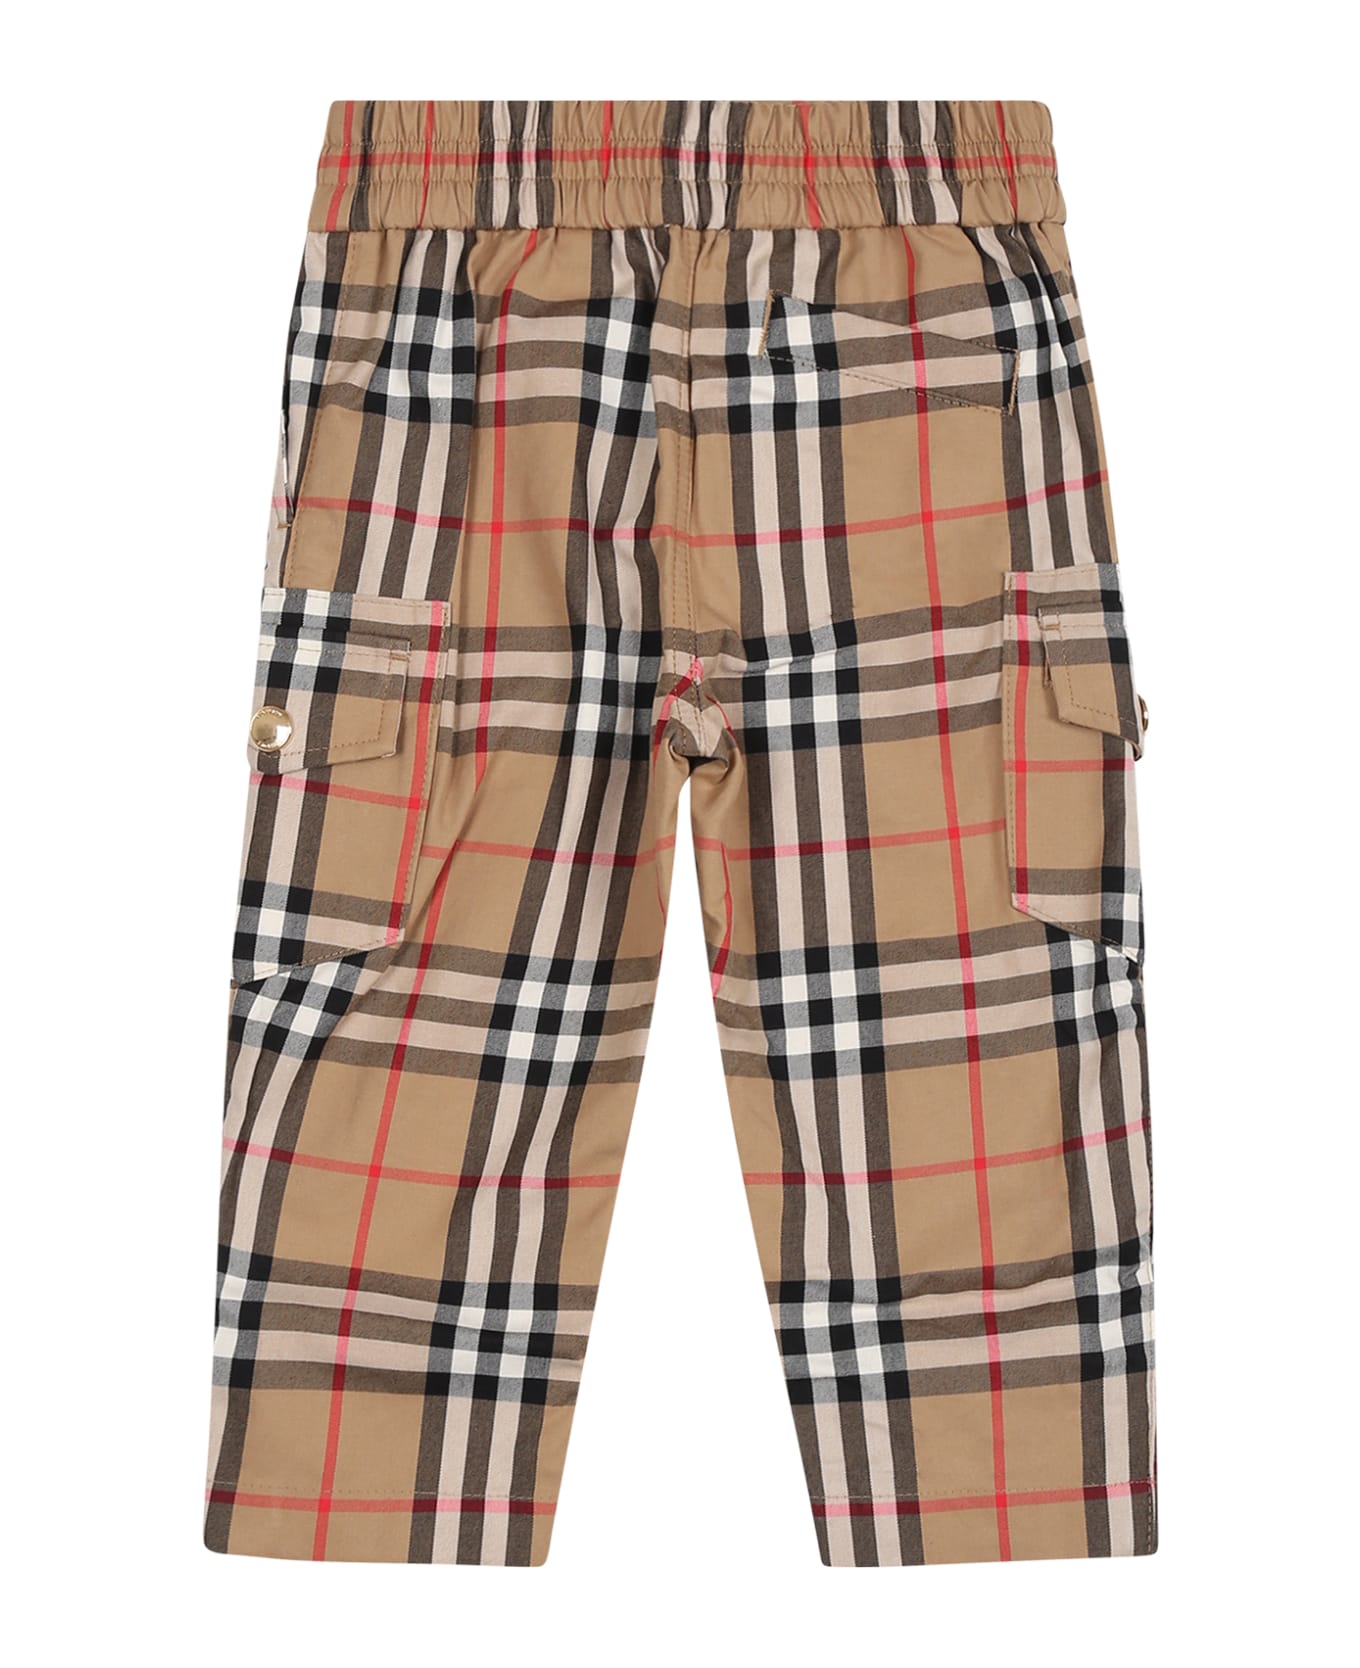 Burberry Beige Pants For Boy With Iconic All-over Check - Beige